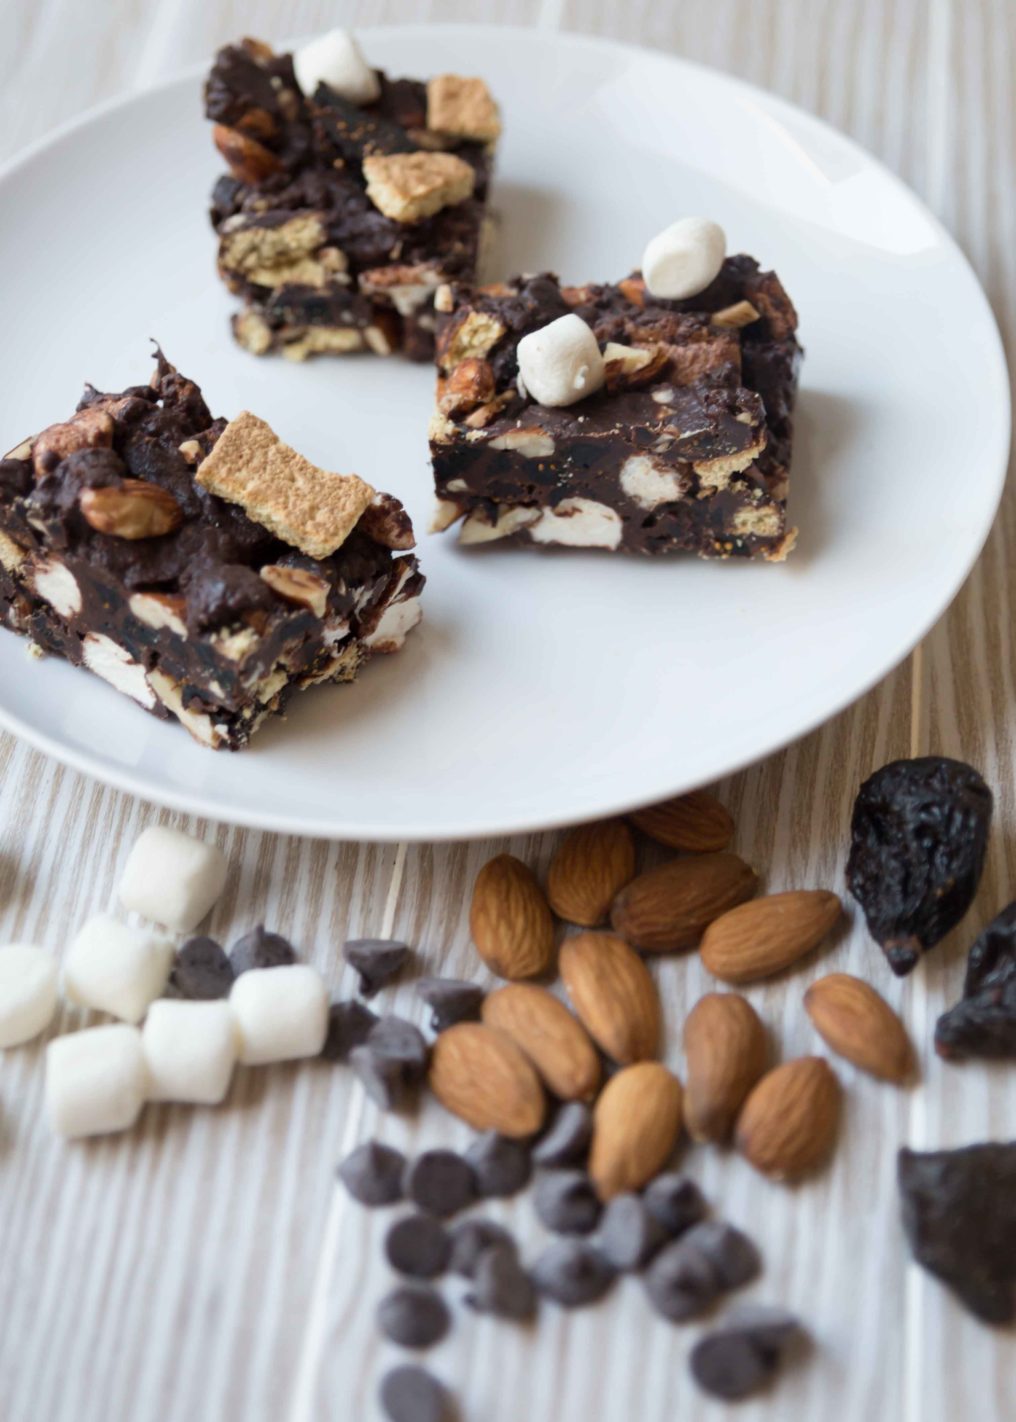 The rocky road chocolate bar recipe makes a great summer campfire snack. No need for hangers or bonfire. Each rocky road chocolate bar is chock full of s'more ingredients and chewy figs.